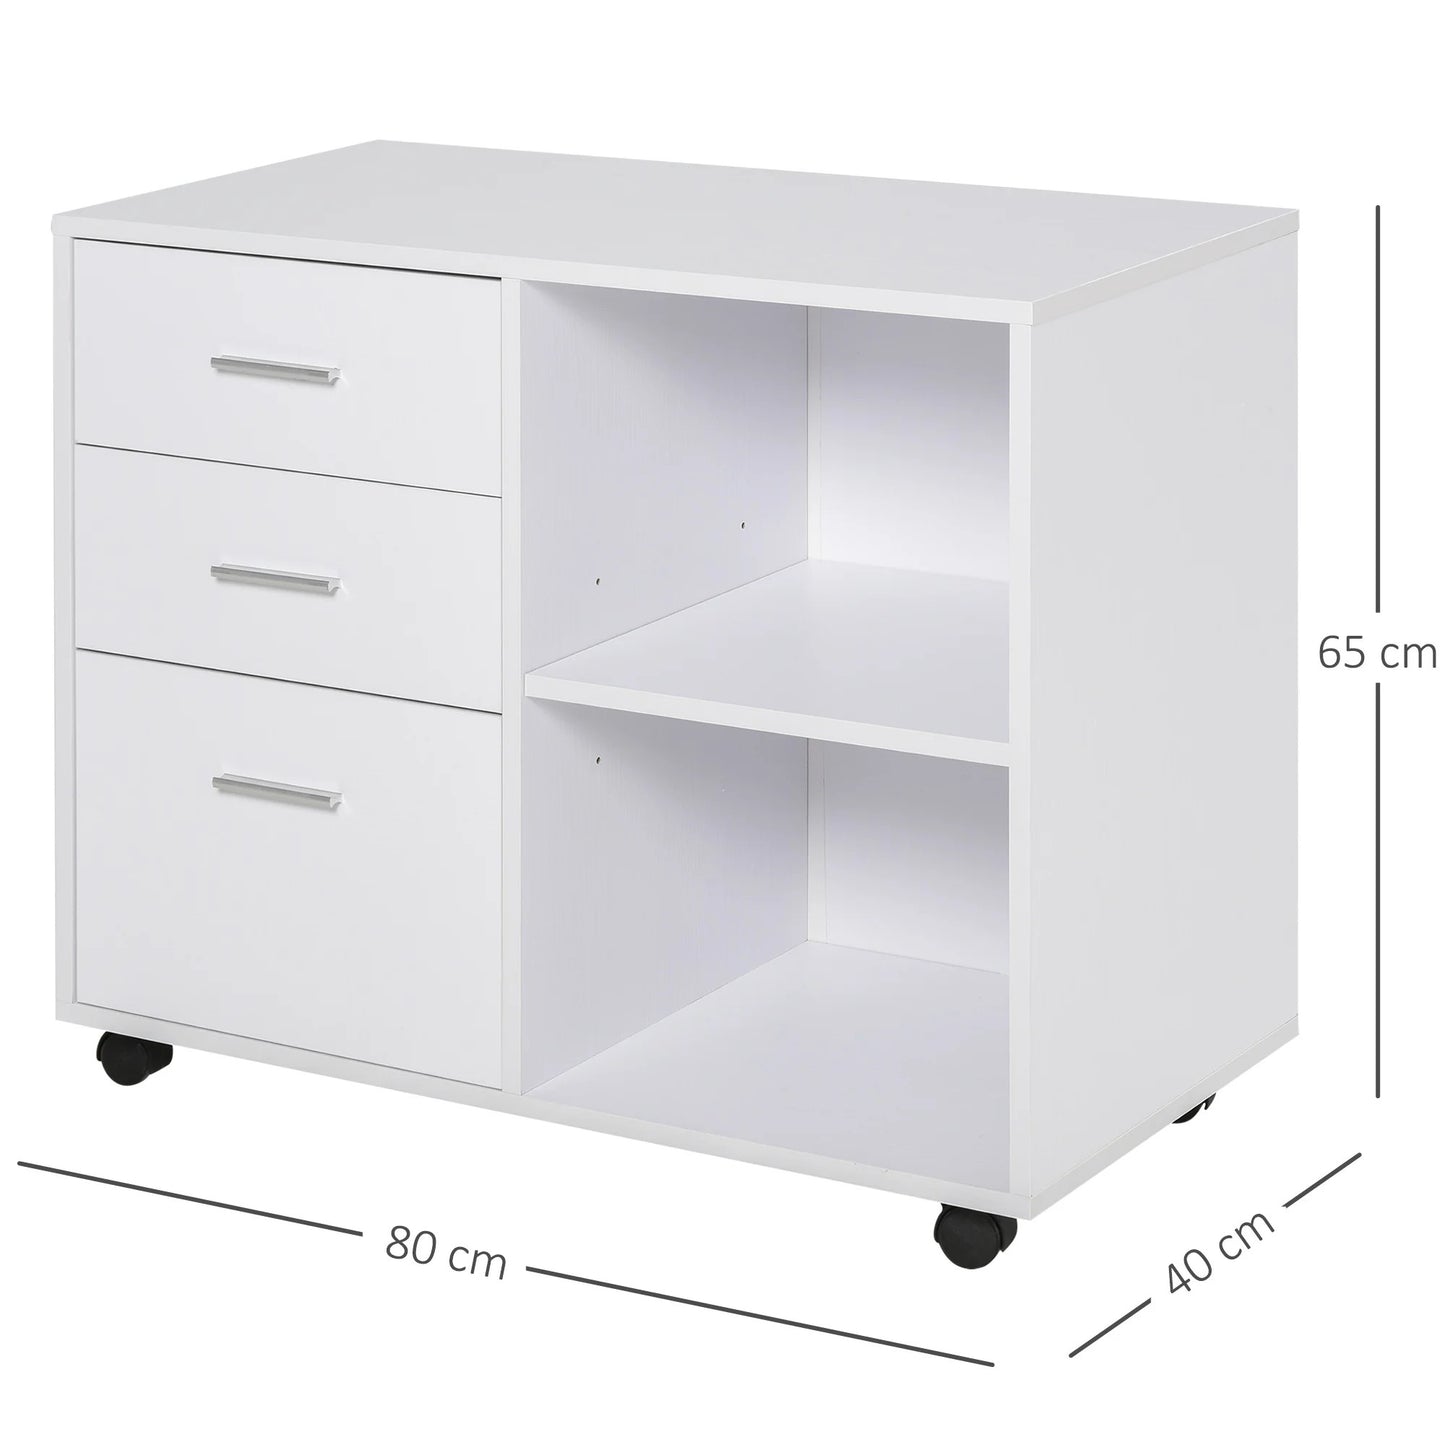 ProperAV Extra Particle Board Rolling Storage Cabinet - maplin.co.uk